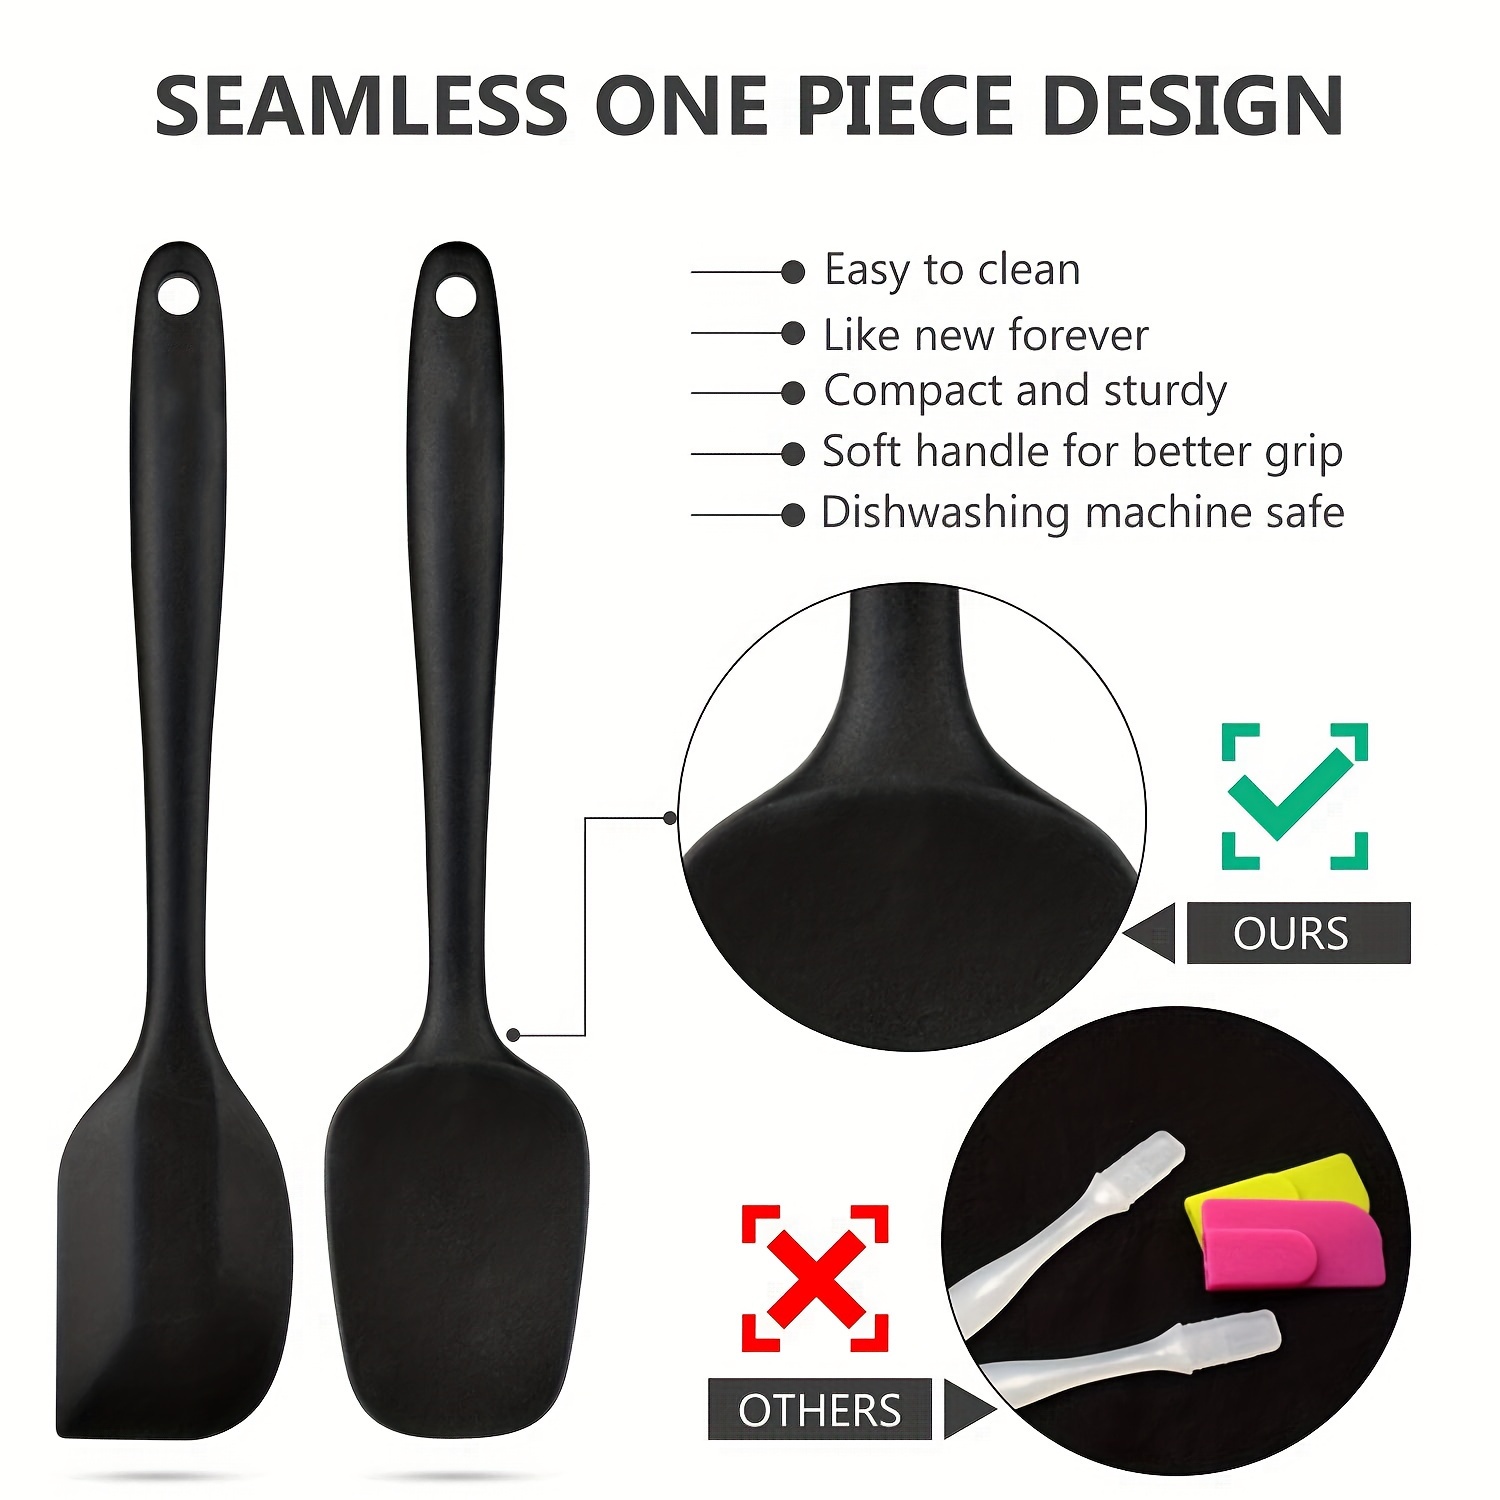 Food Grade Silicone Rubber Spatula Set for Baking. Cooking. and